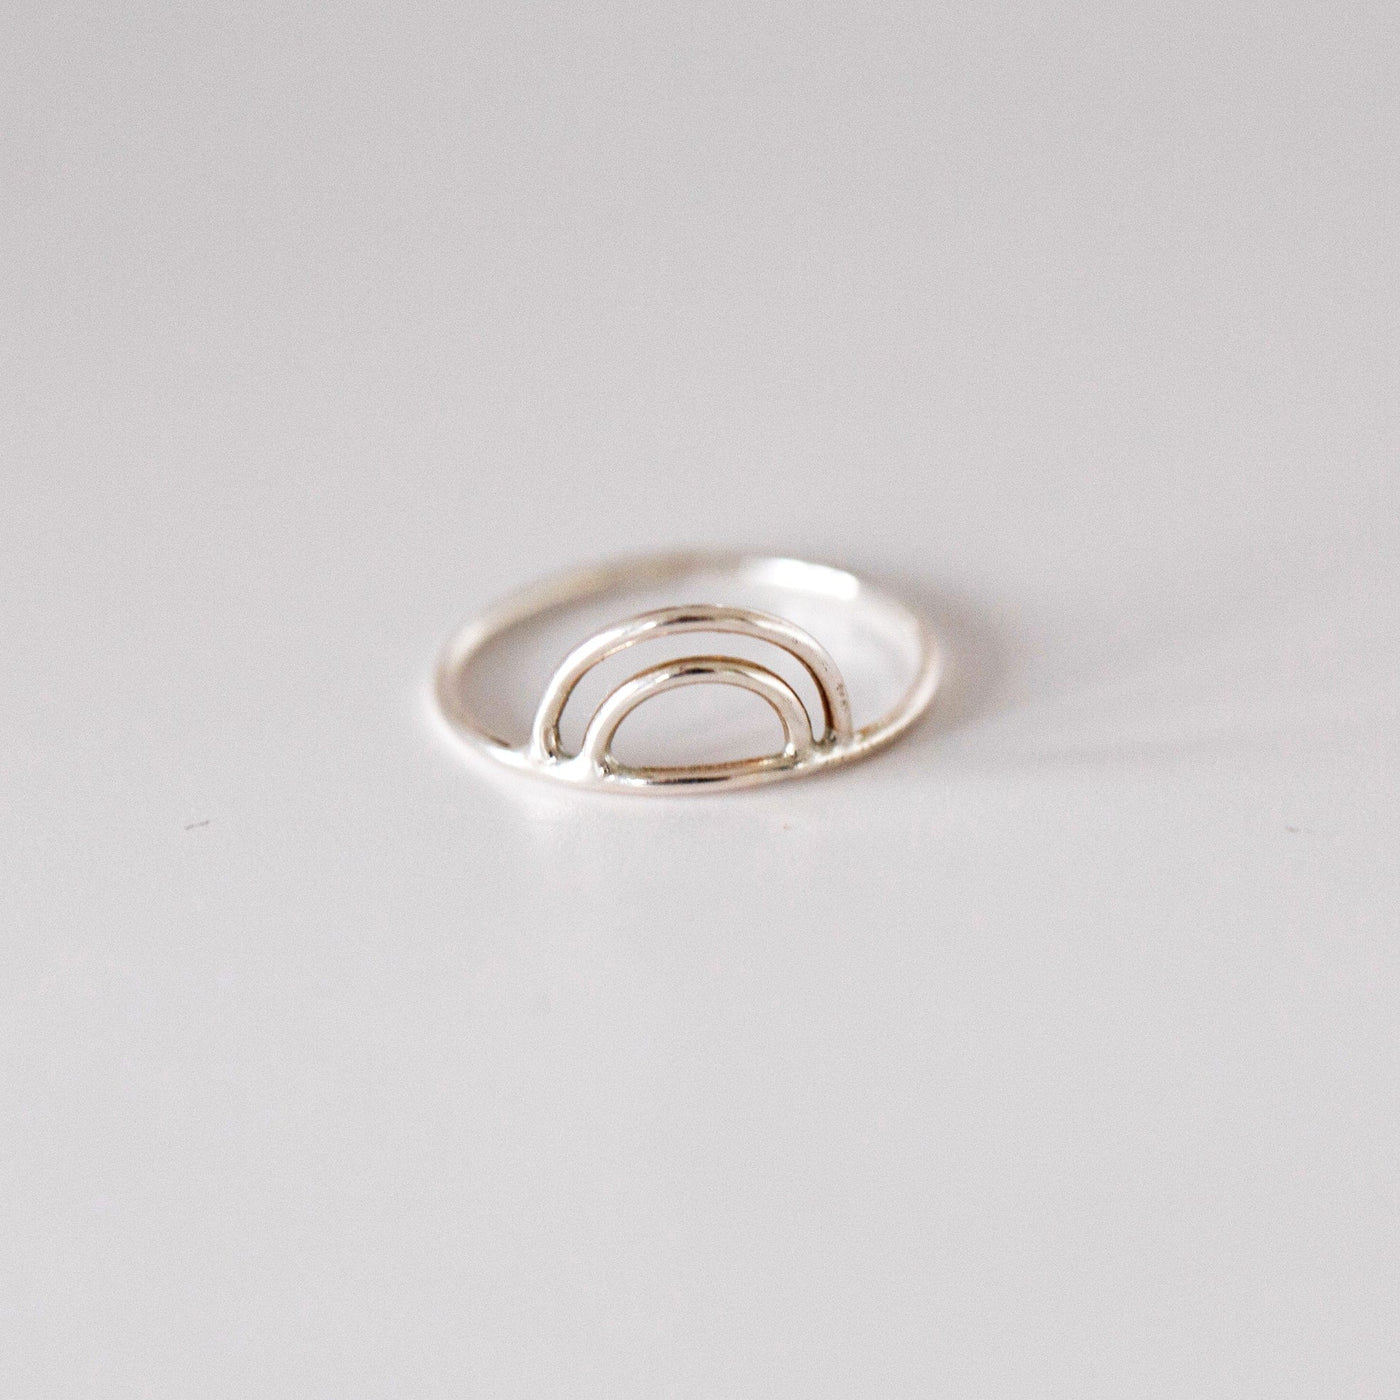 Made By Mary Rainbow Ring | Delicate, Dainty, Hand Shaped & Soldered